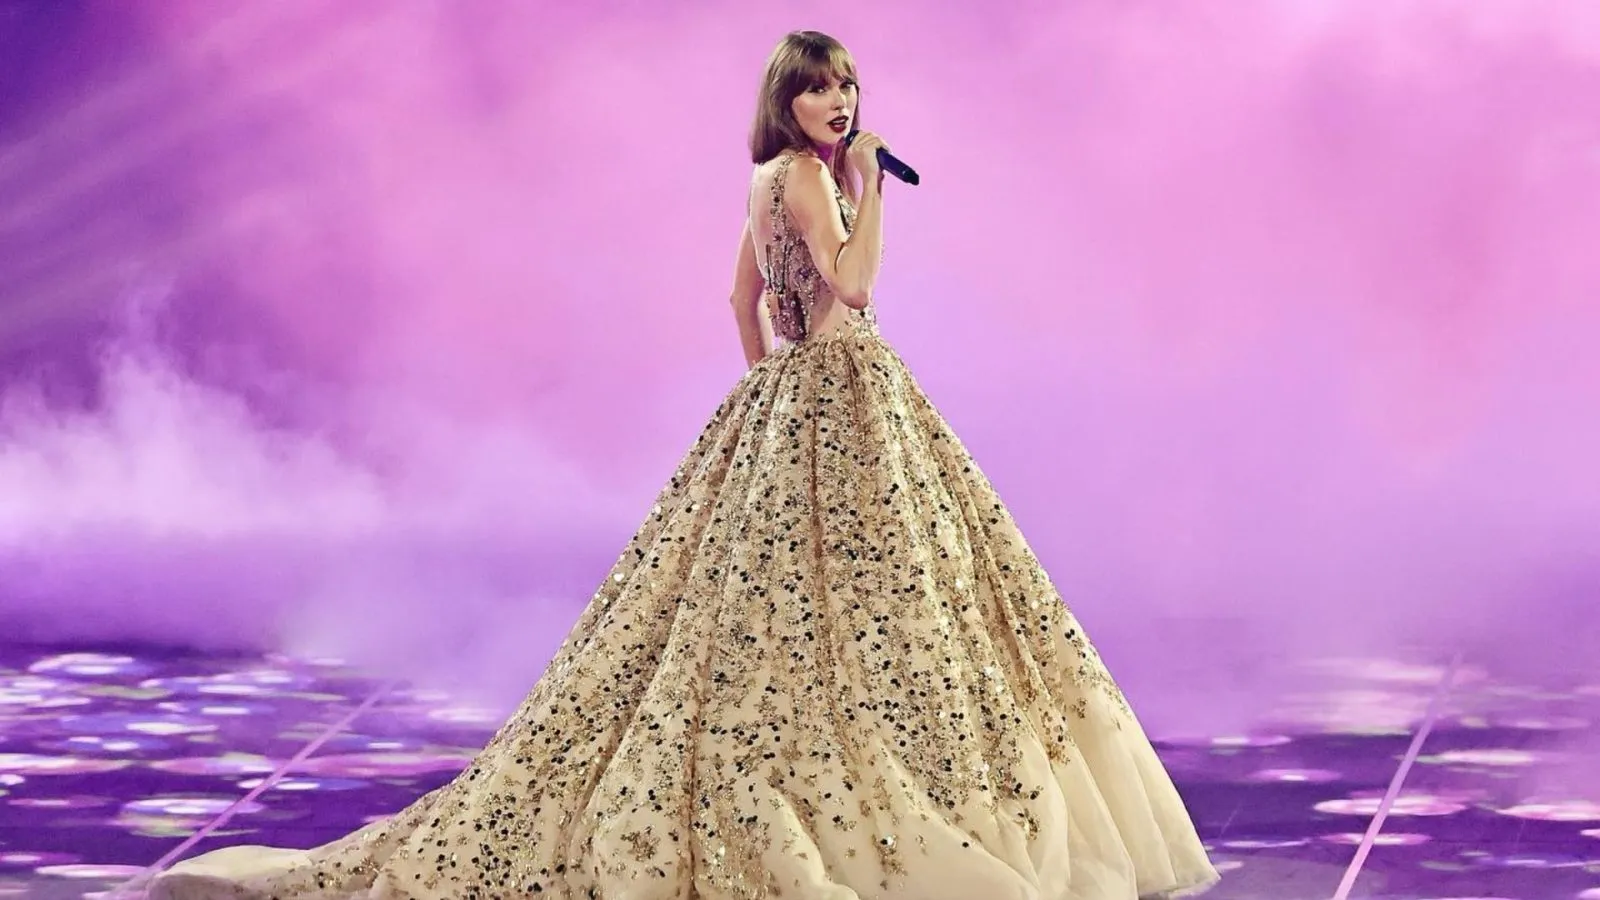 Taylor Swift's Magical Journey: 'The Eras Tour' Streams to Your Home